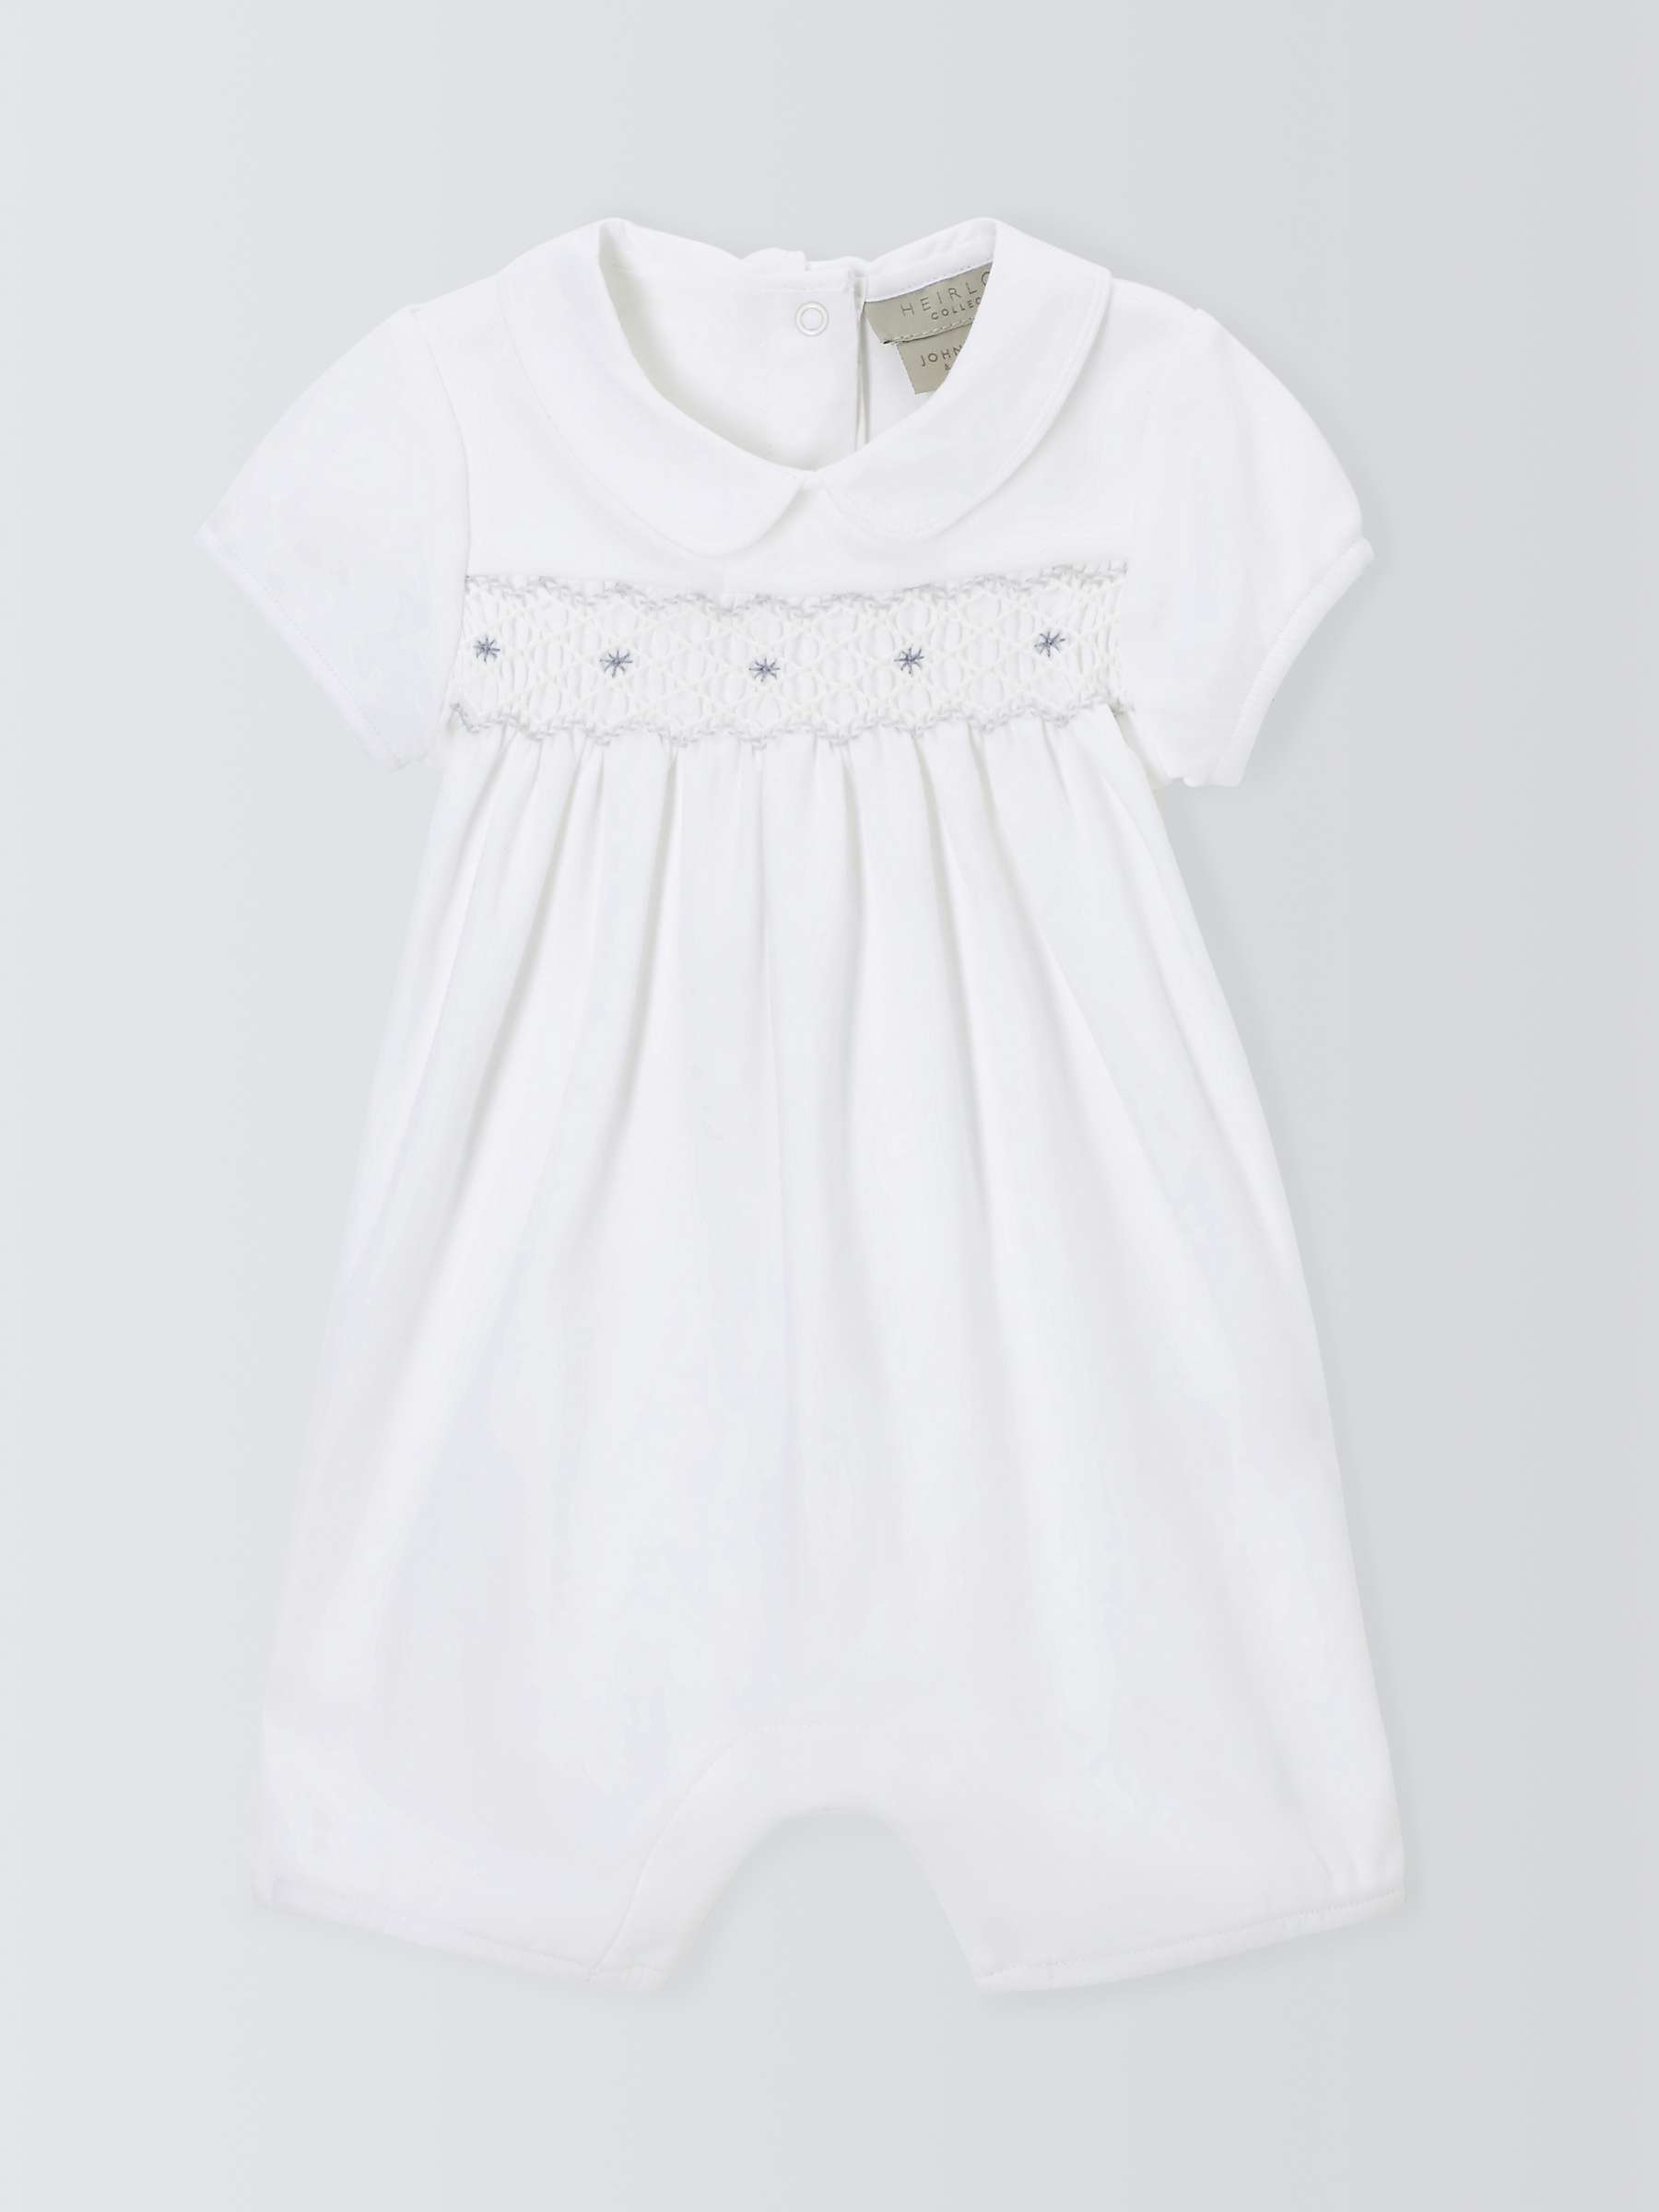 Buy John Lewis Heirloom Collection Baby Pima Cotton Smocked Romper, White Online at johnlewis.com